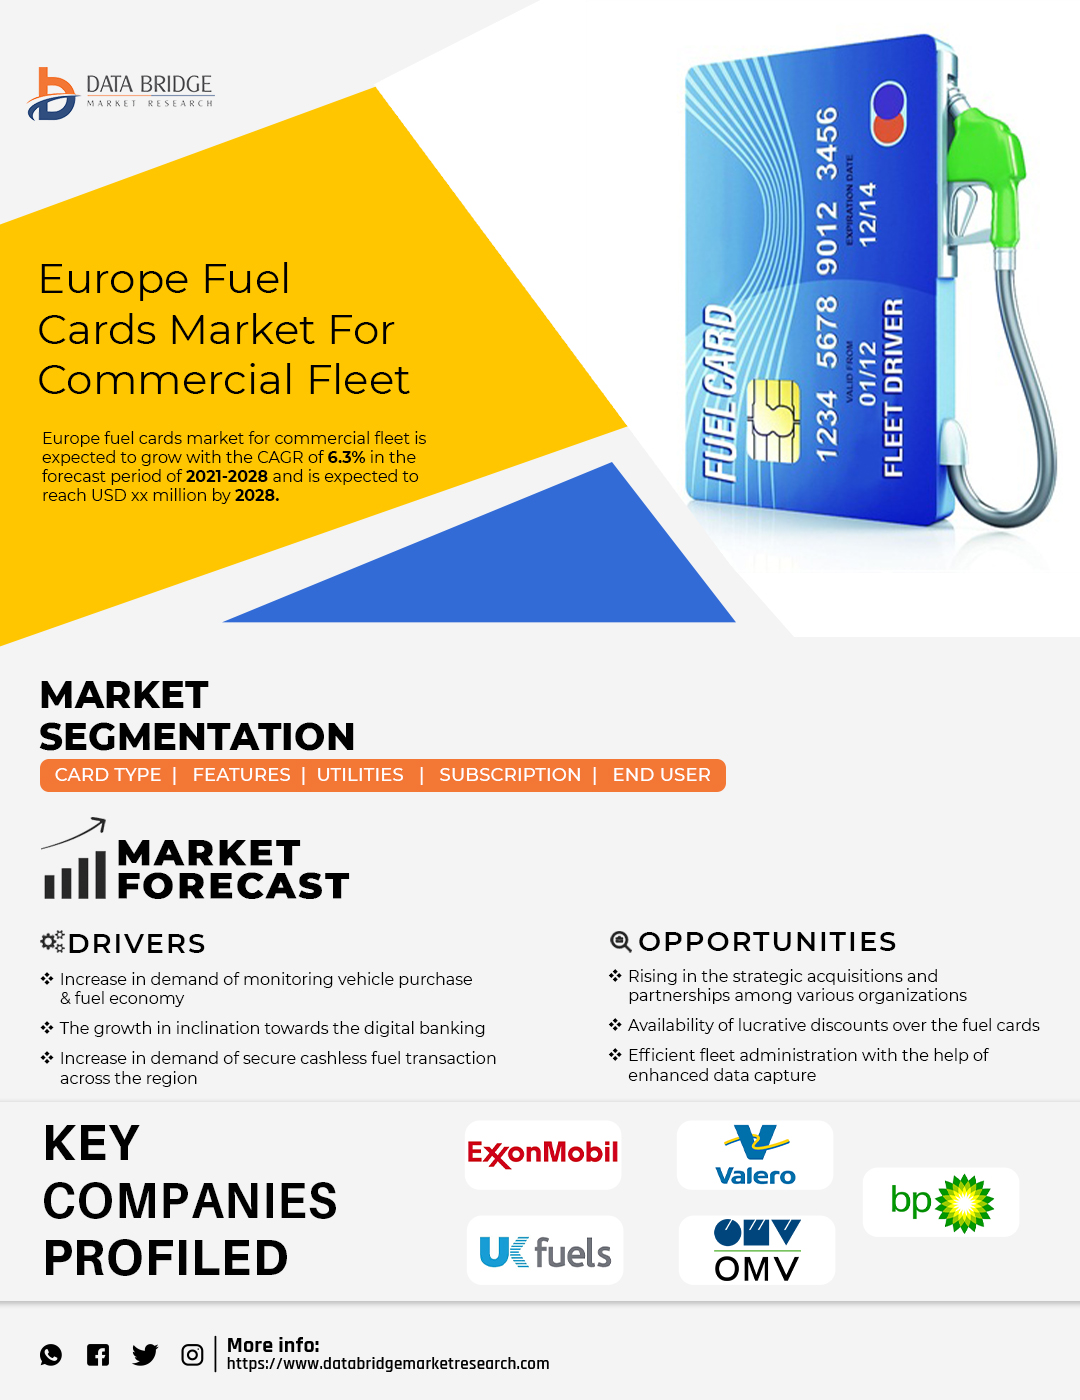 Europe Fuel Card Market For Commercial Fleet